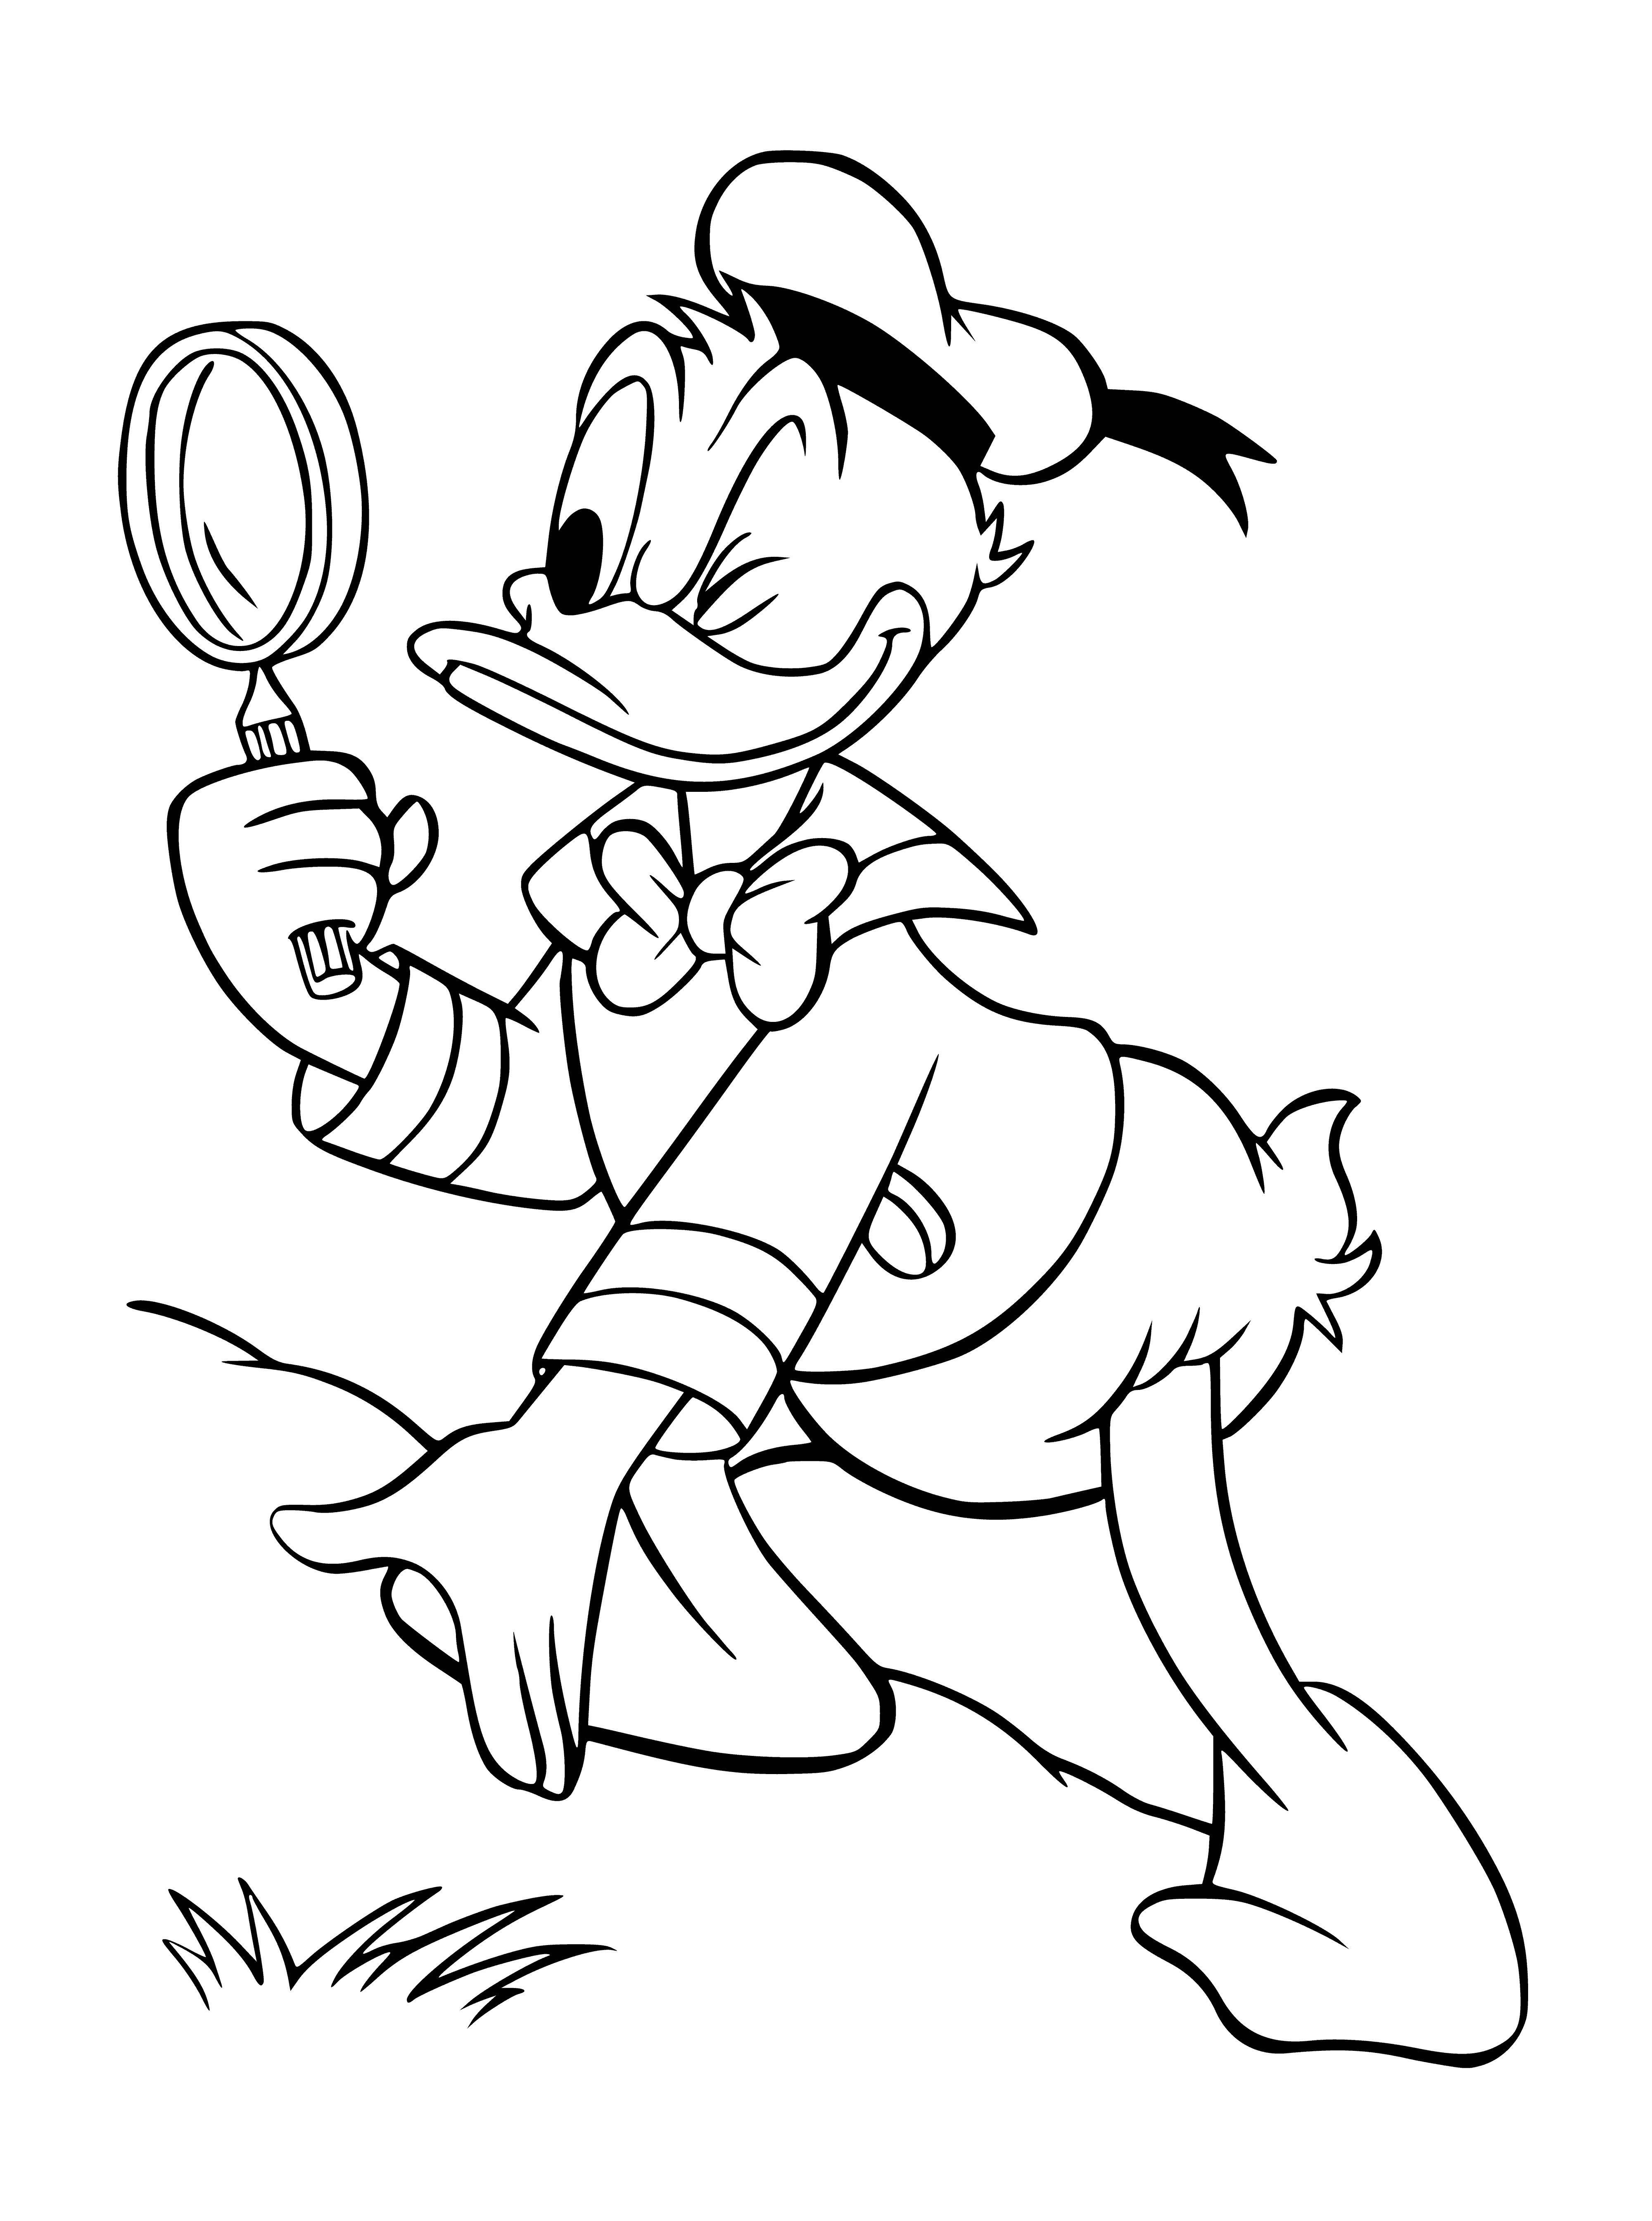 Naturalist coloring page